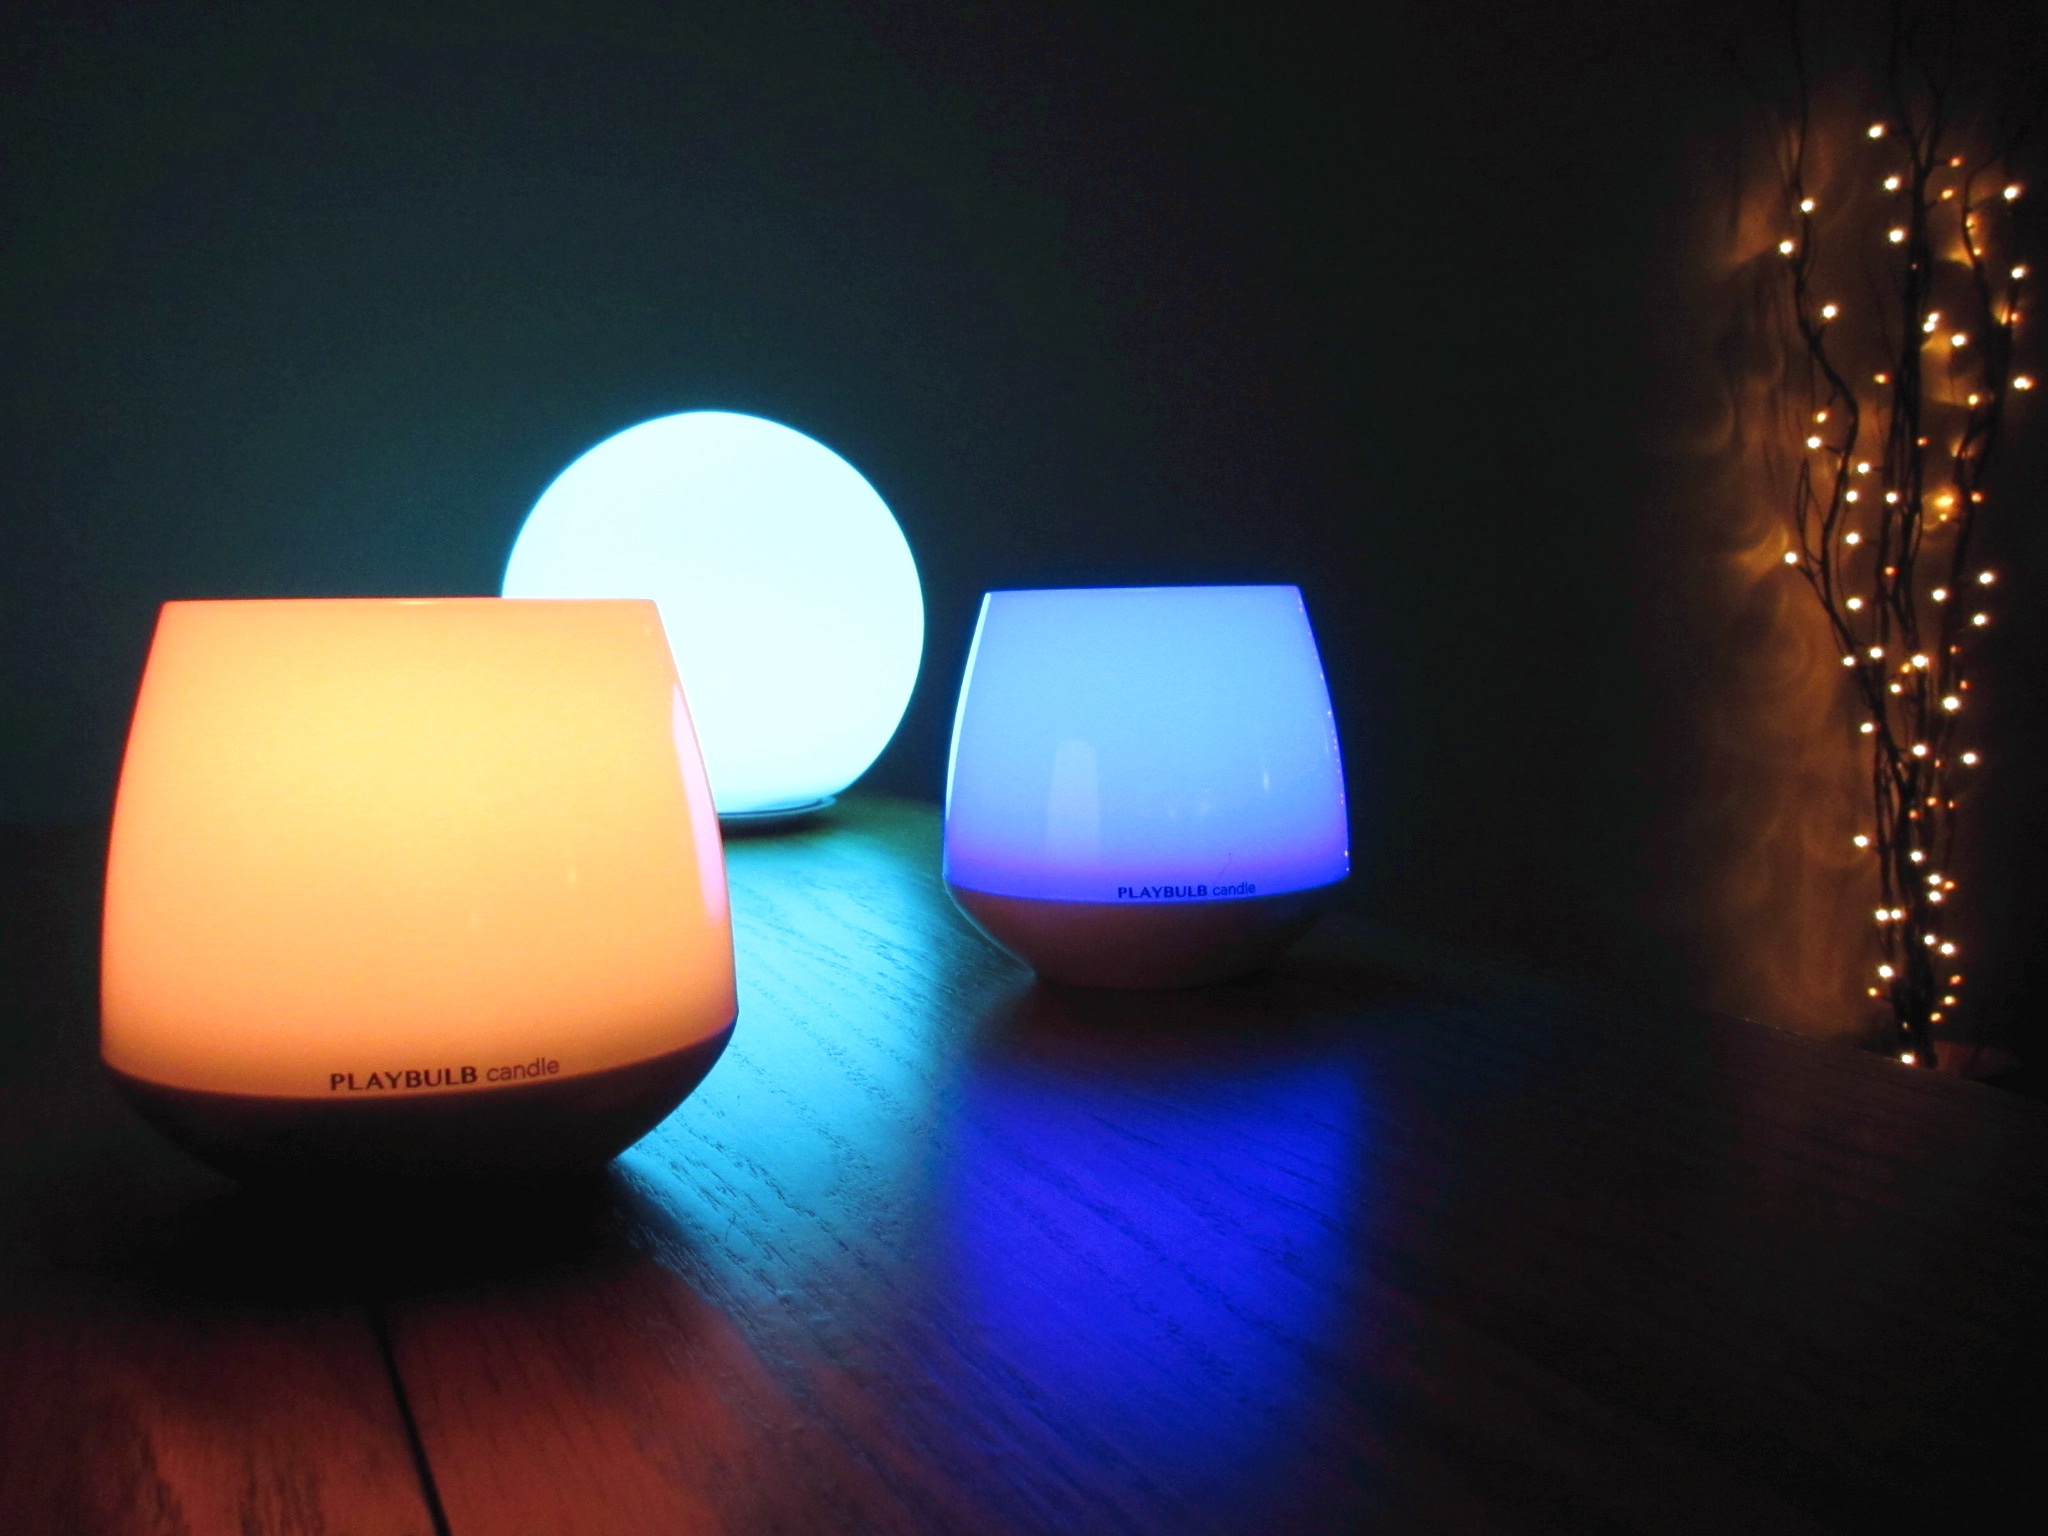 Mipow PLAYBULBs Offers a Cheaper to Philips Hue Technically Well